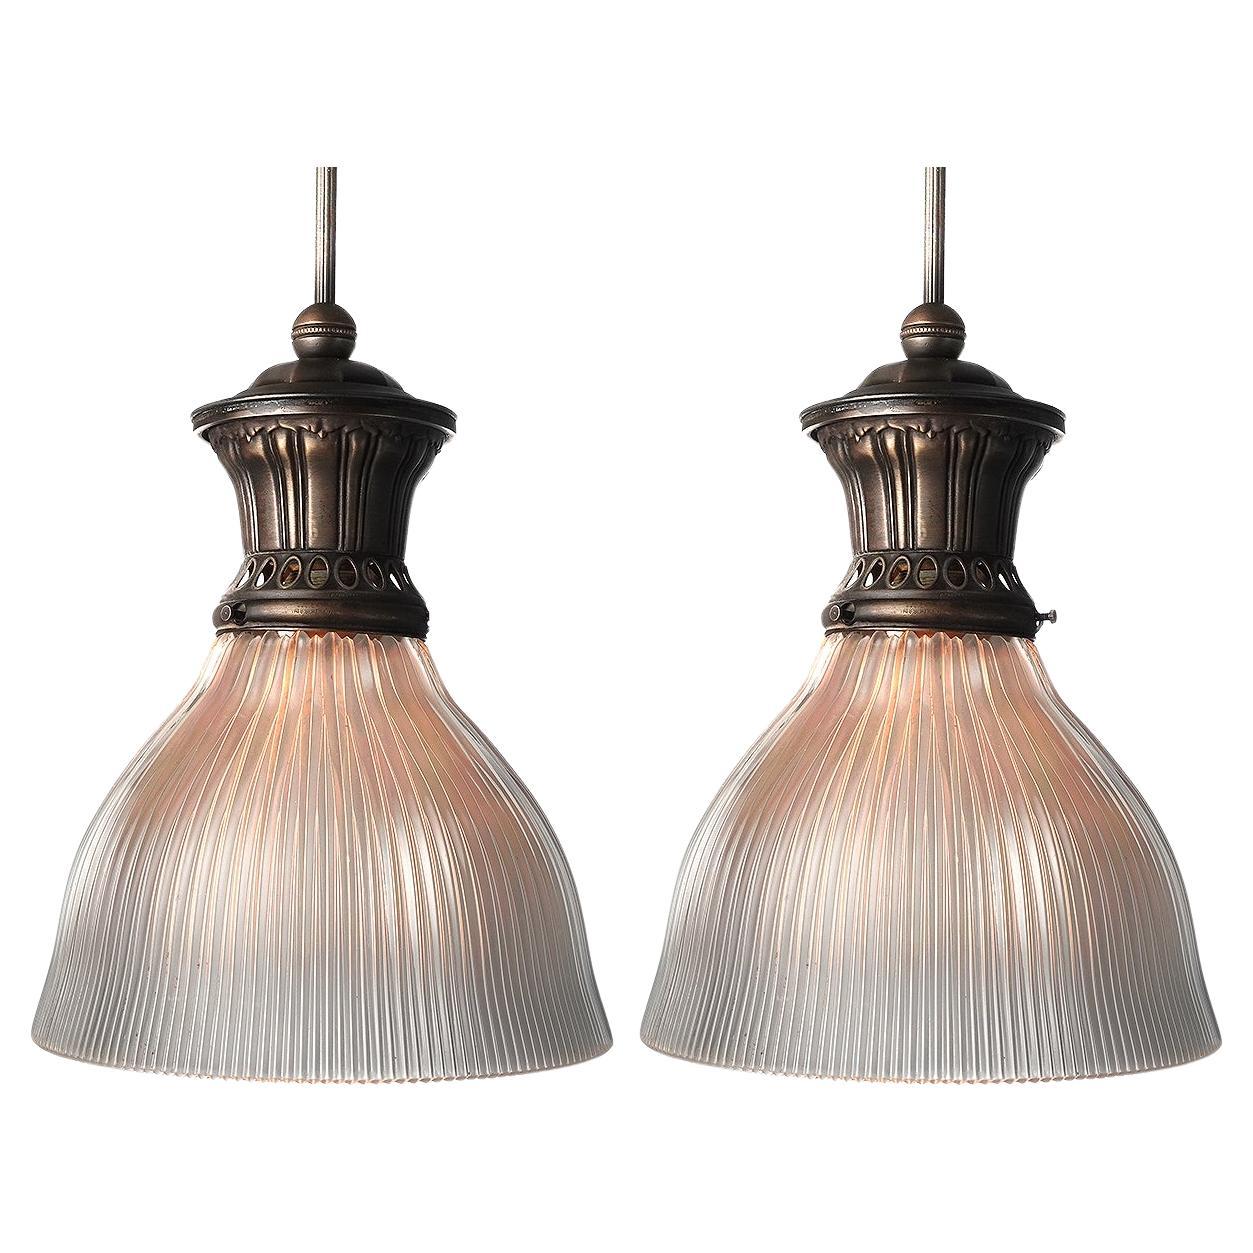 Matching Pair of Frosted Bell Prismatic Welsbach Lamps